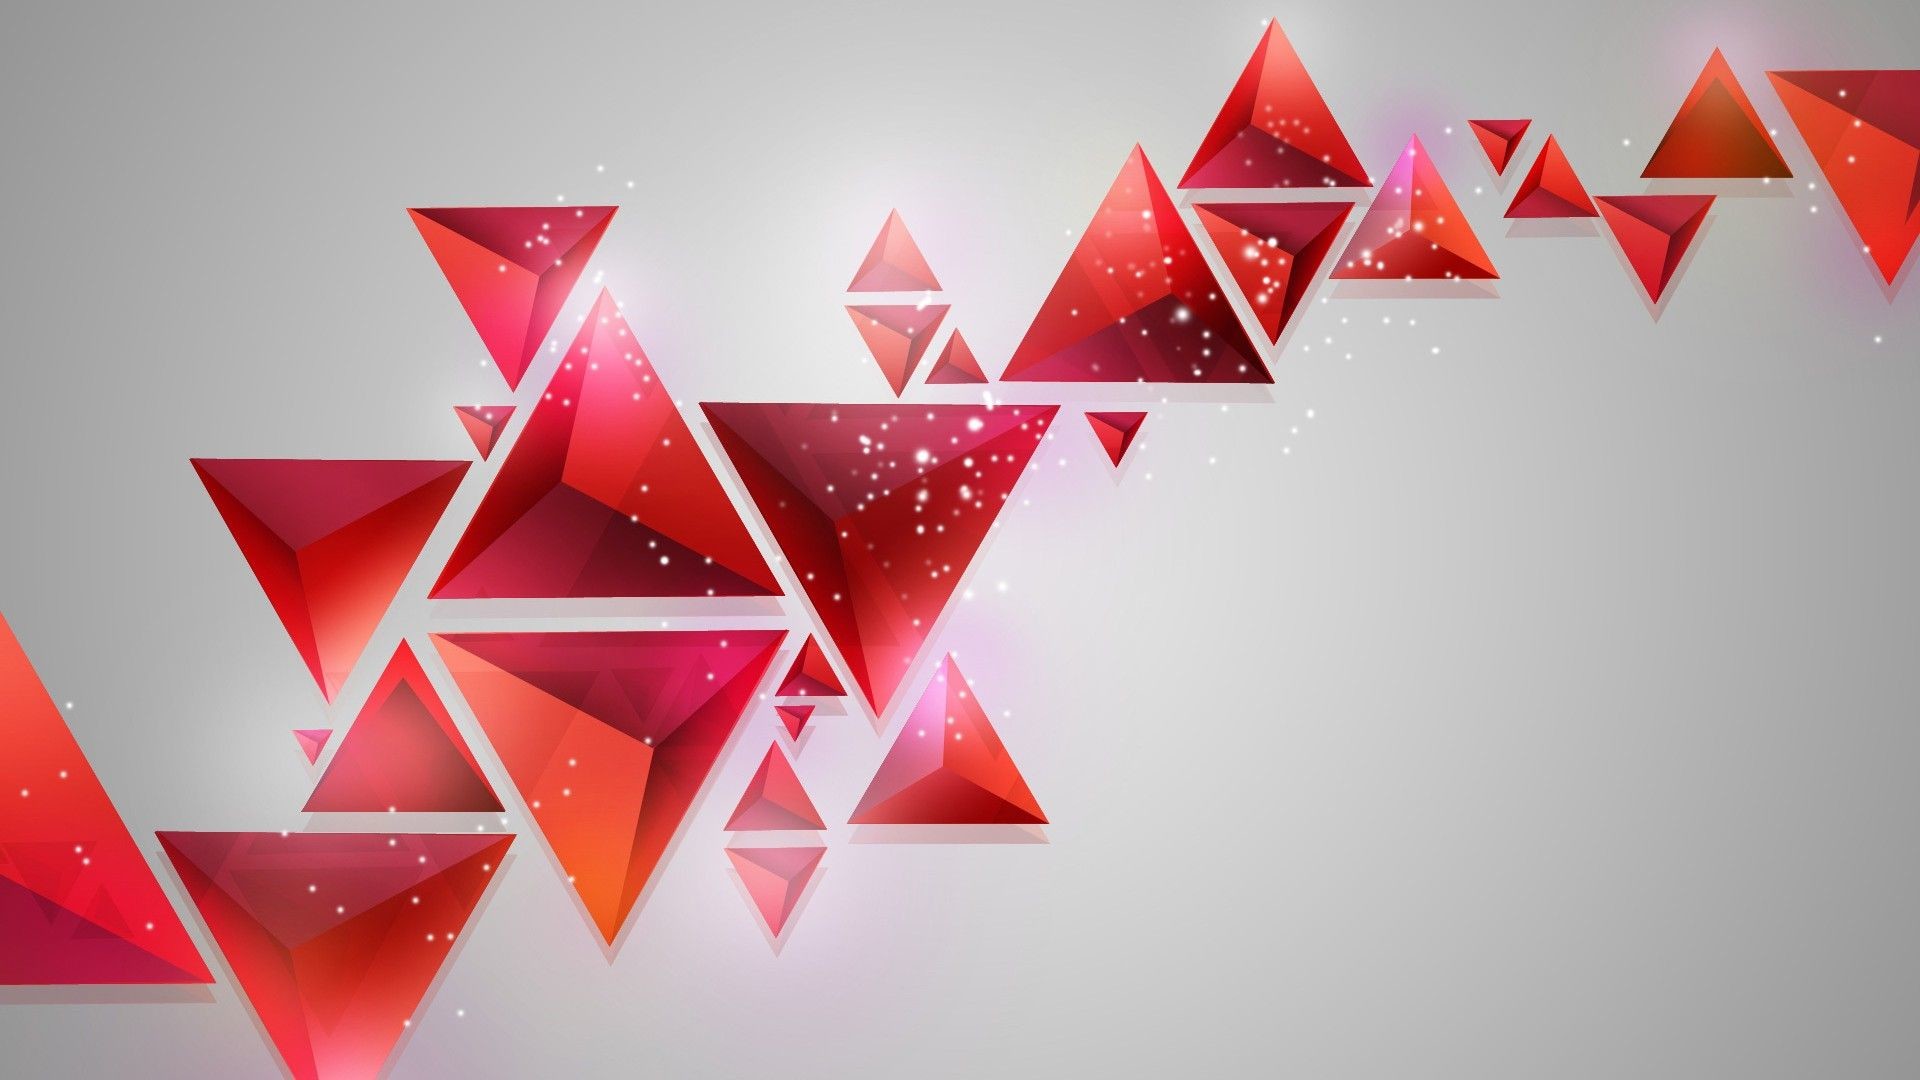 1920x1080, Abstract Minimalism Geometry Triangles Wallpaper - Geometric Abstract Red Background - HD Wallpaper 